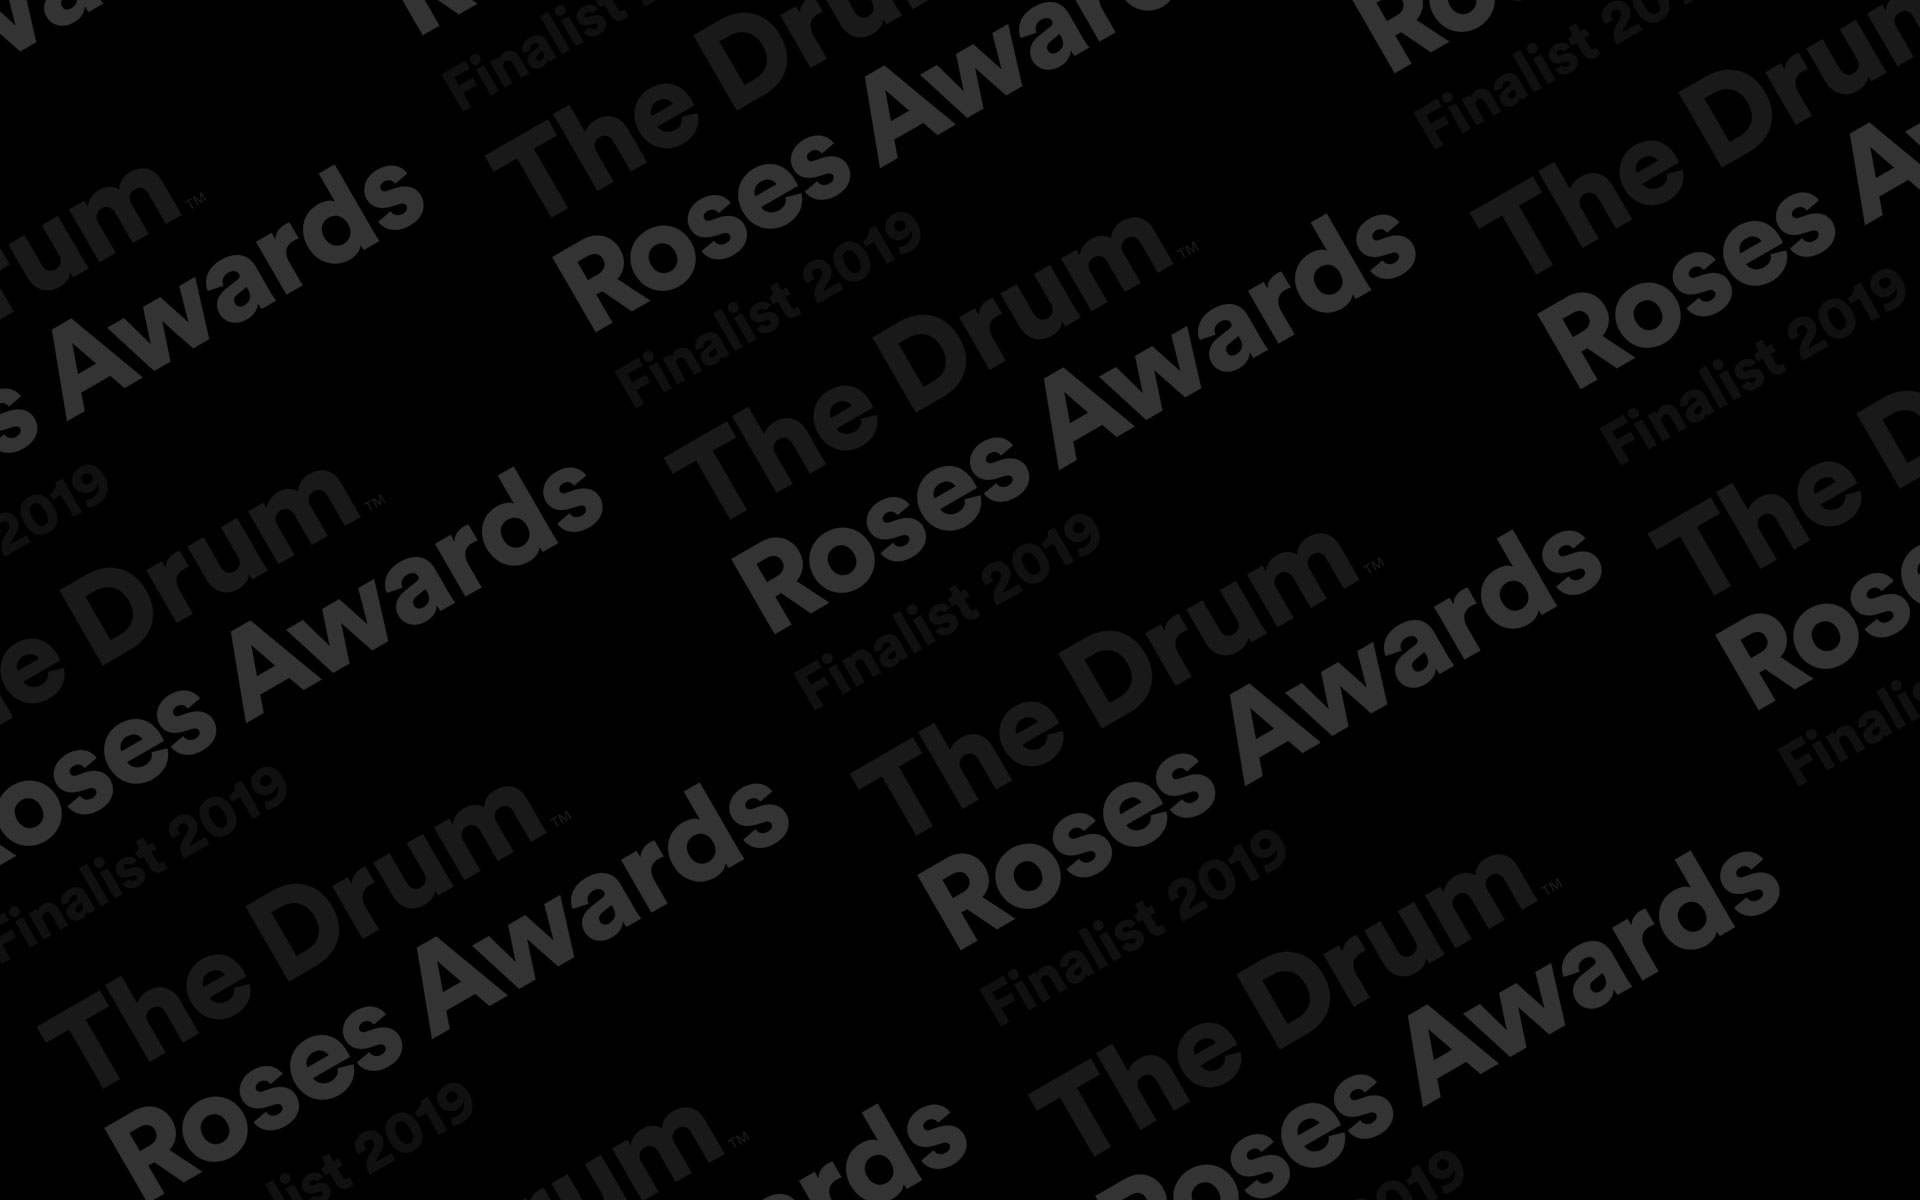 We’re nominated finalists in The Drum Roses Awards